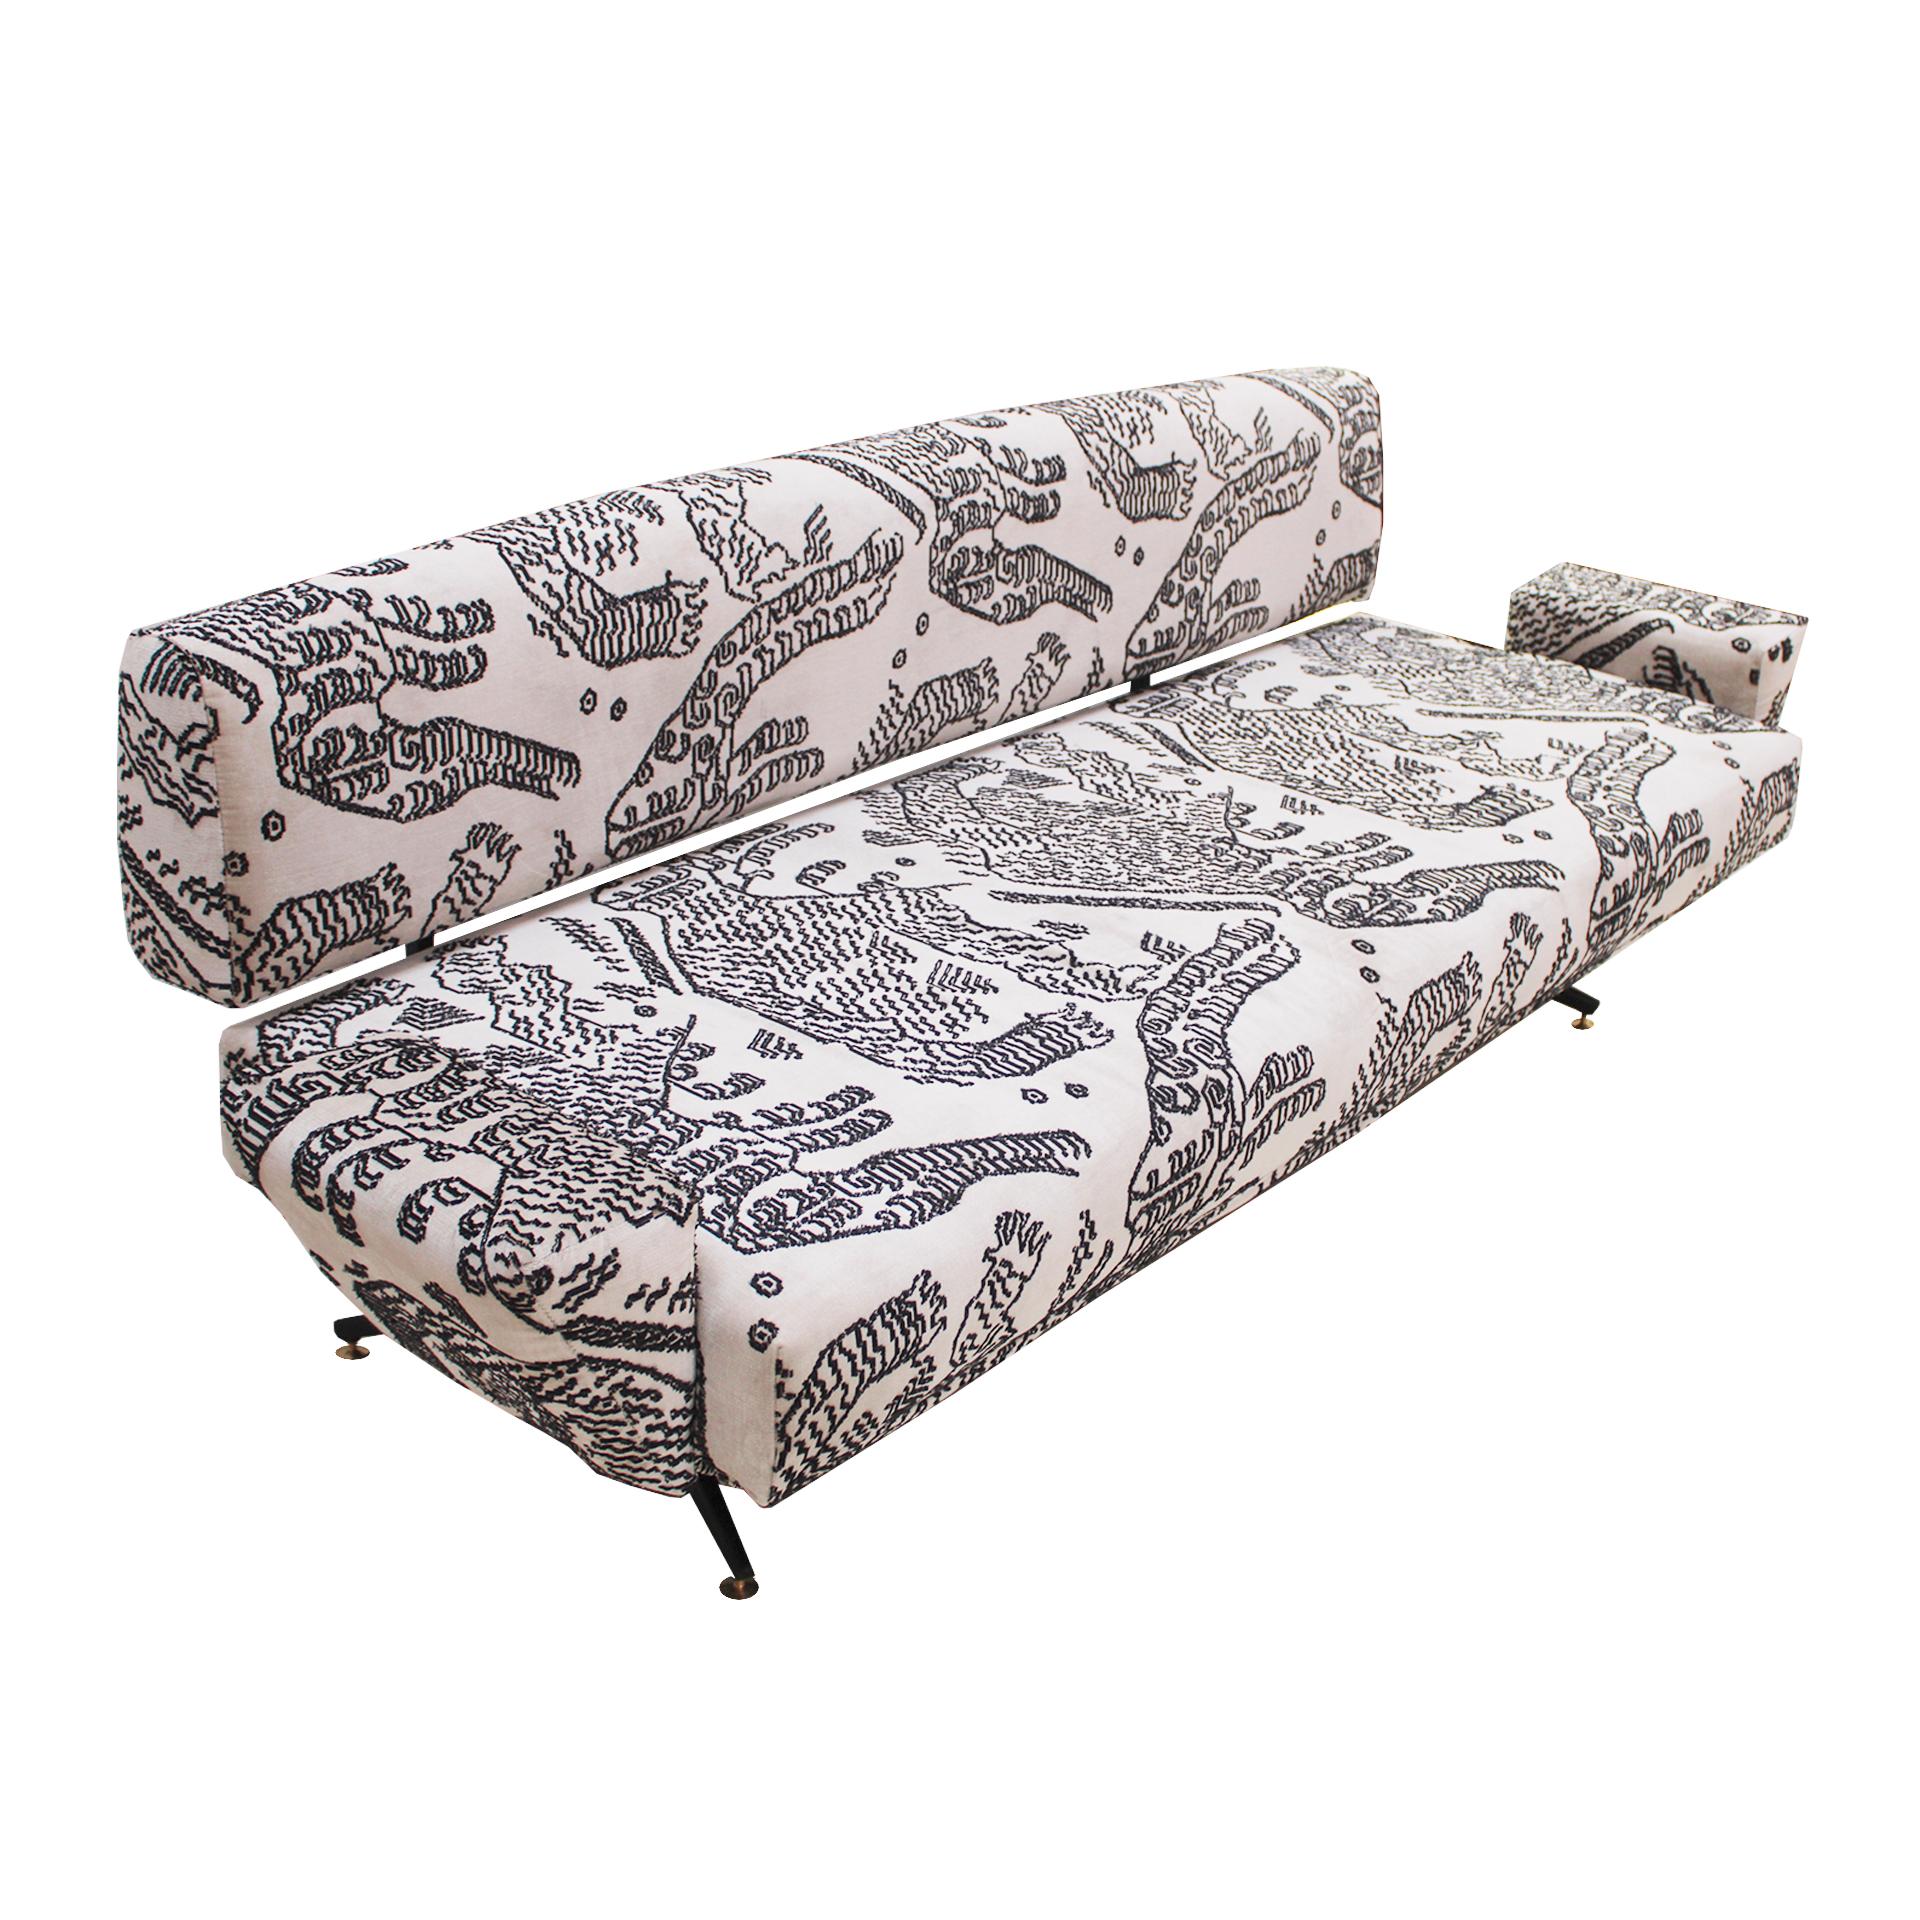 This 1950s Italian sofa features a sleek metal frame. Its cotton fabric upholstery, with Dedar's distinctive 'Tiger Mountain' design, adds a touch of unique and timeless style.

Measurements: W 195 x D 77 x H 48/70 cm

Every item LA Studio offers is